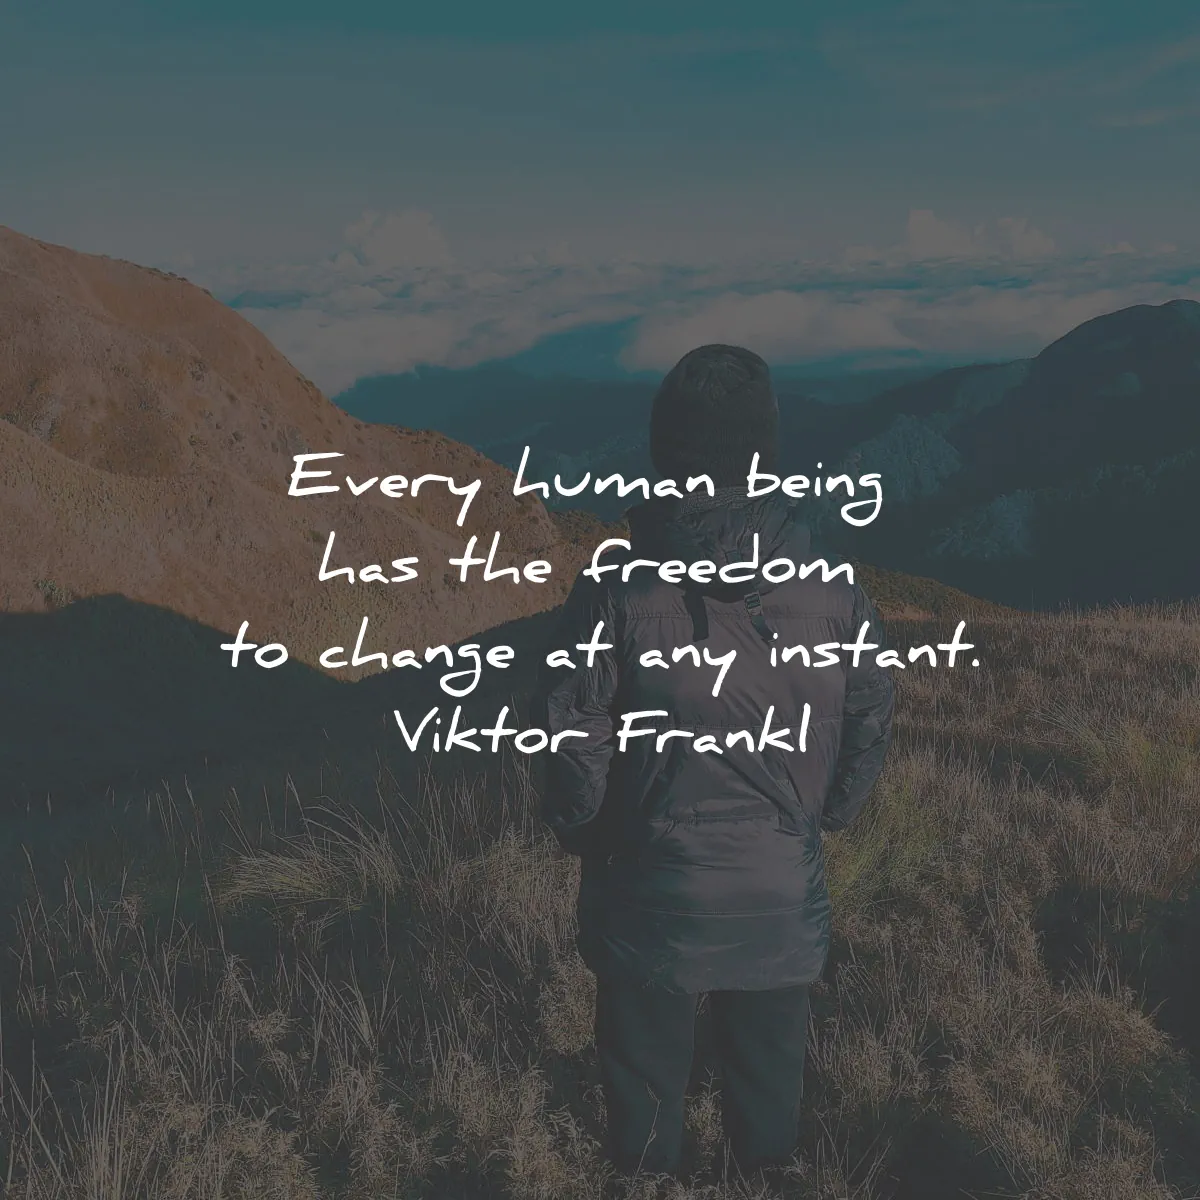 mans search for meaning quotes viktor frankl human freedom change wisdom